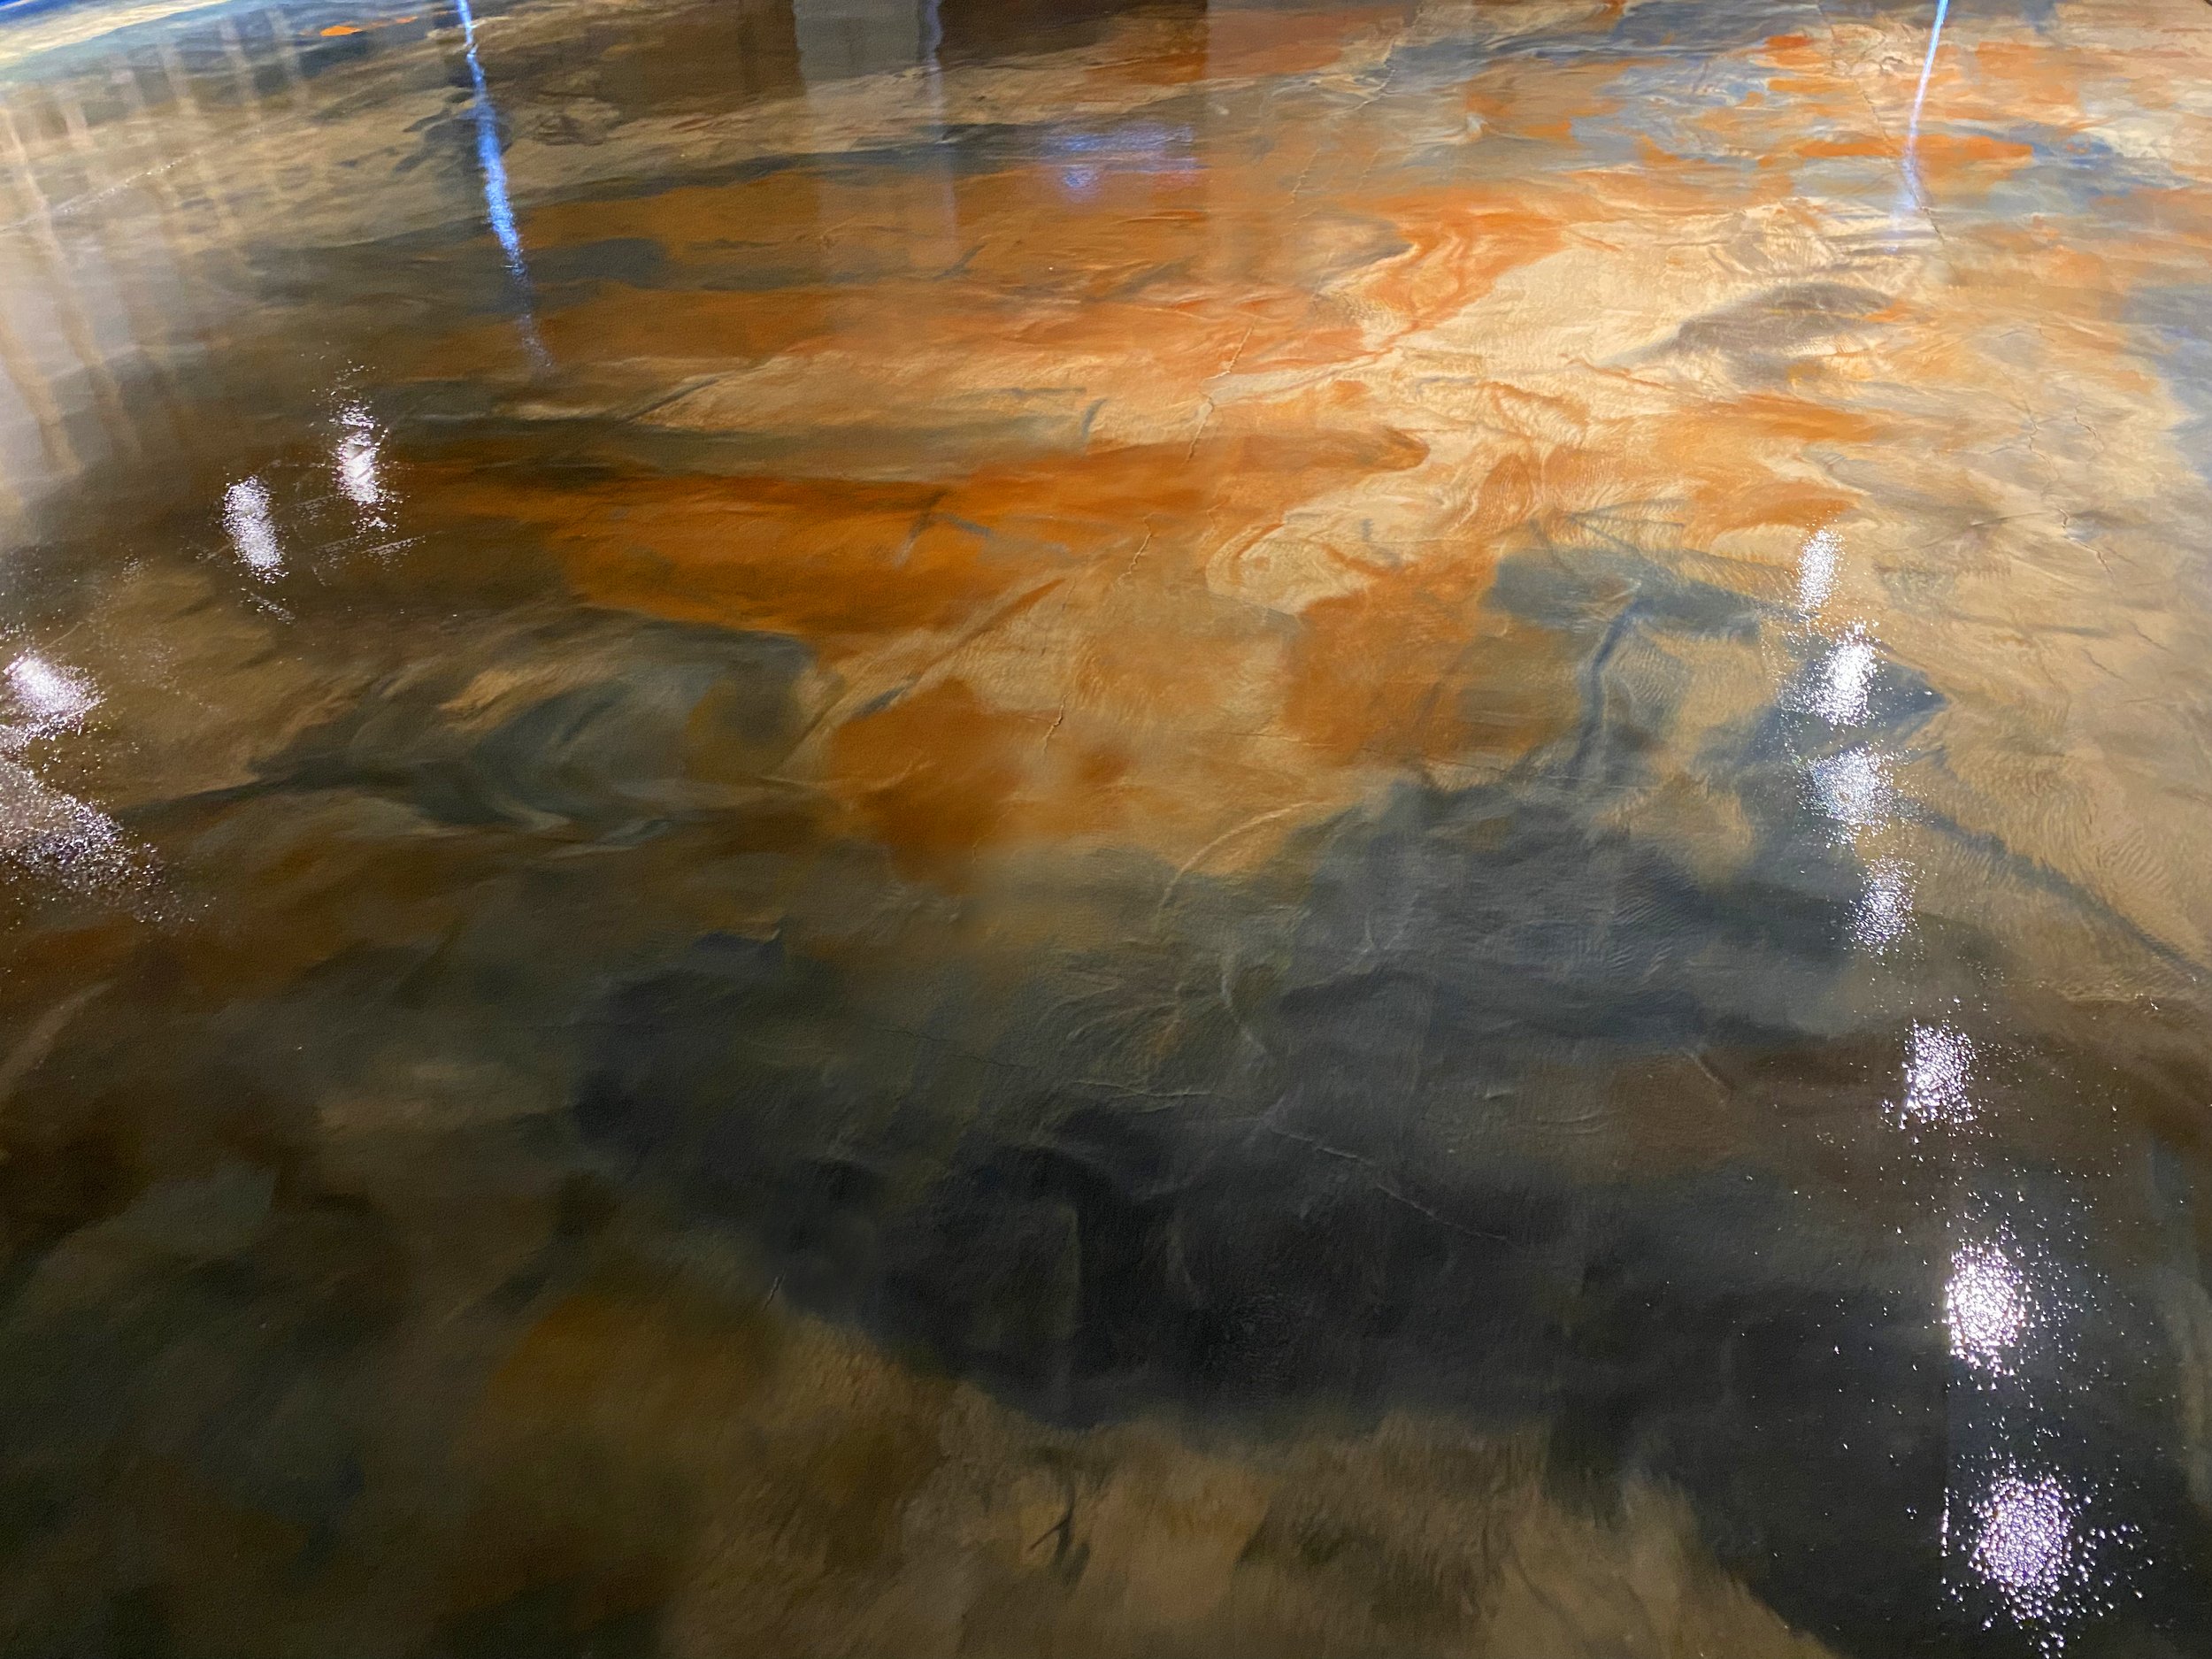 Swirling epoxy flooring at The Water Gallery